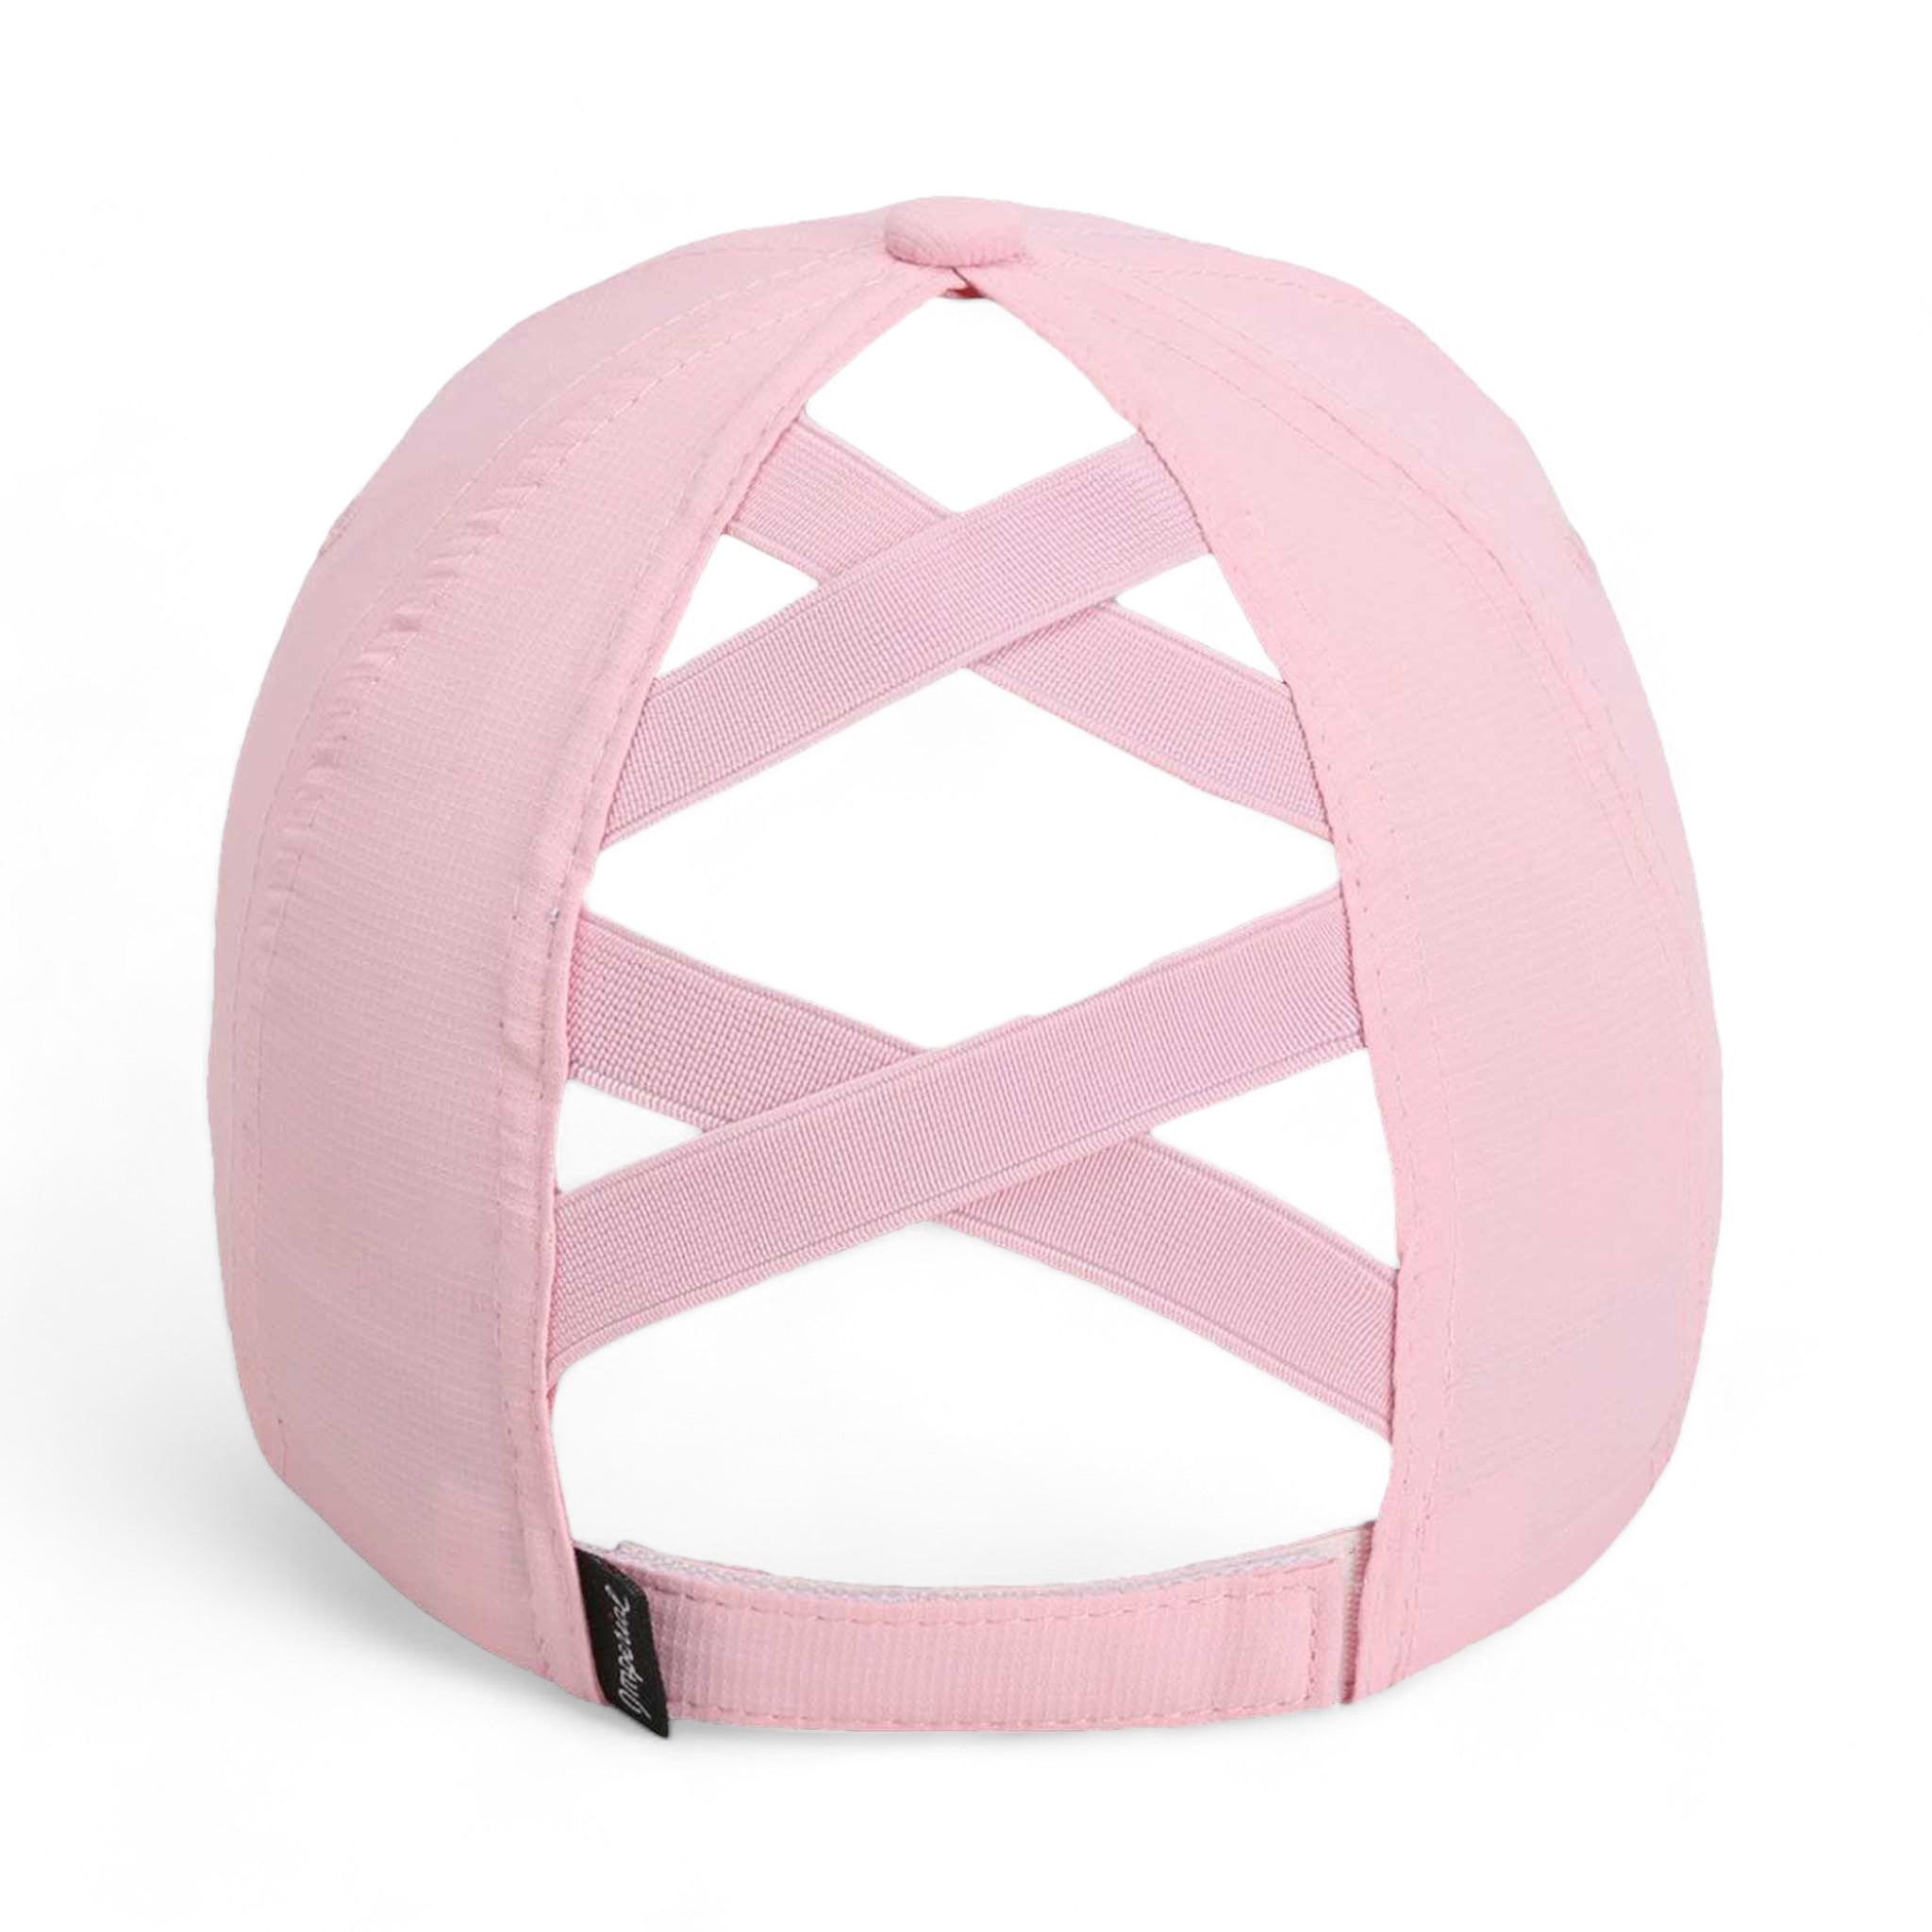 Back view of Imperial L338 custom hat in light pink